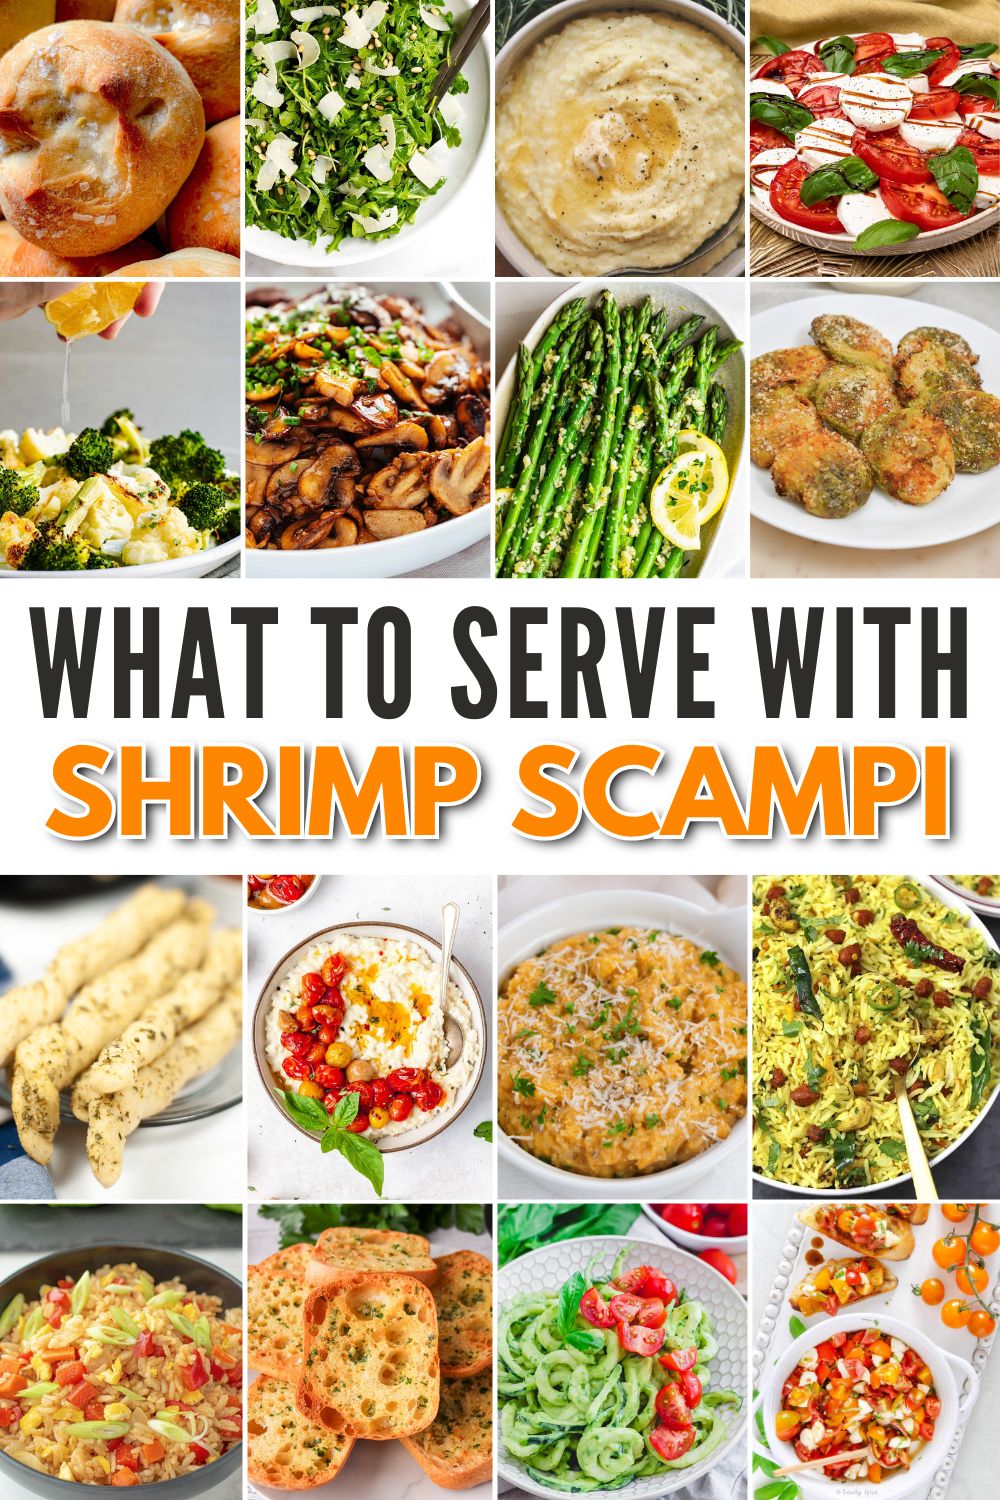 What to serve with shrimp scampi?